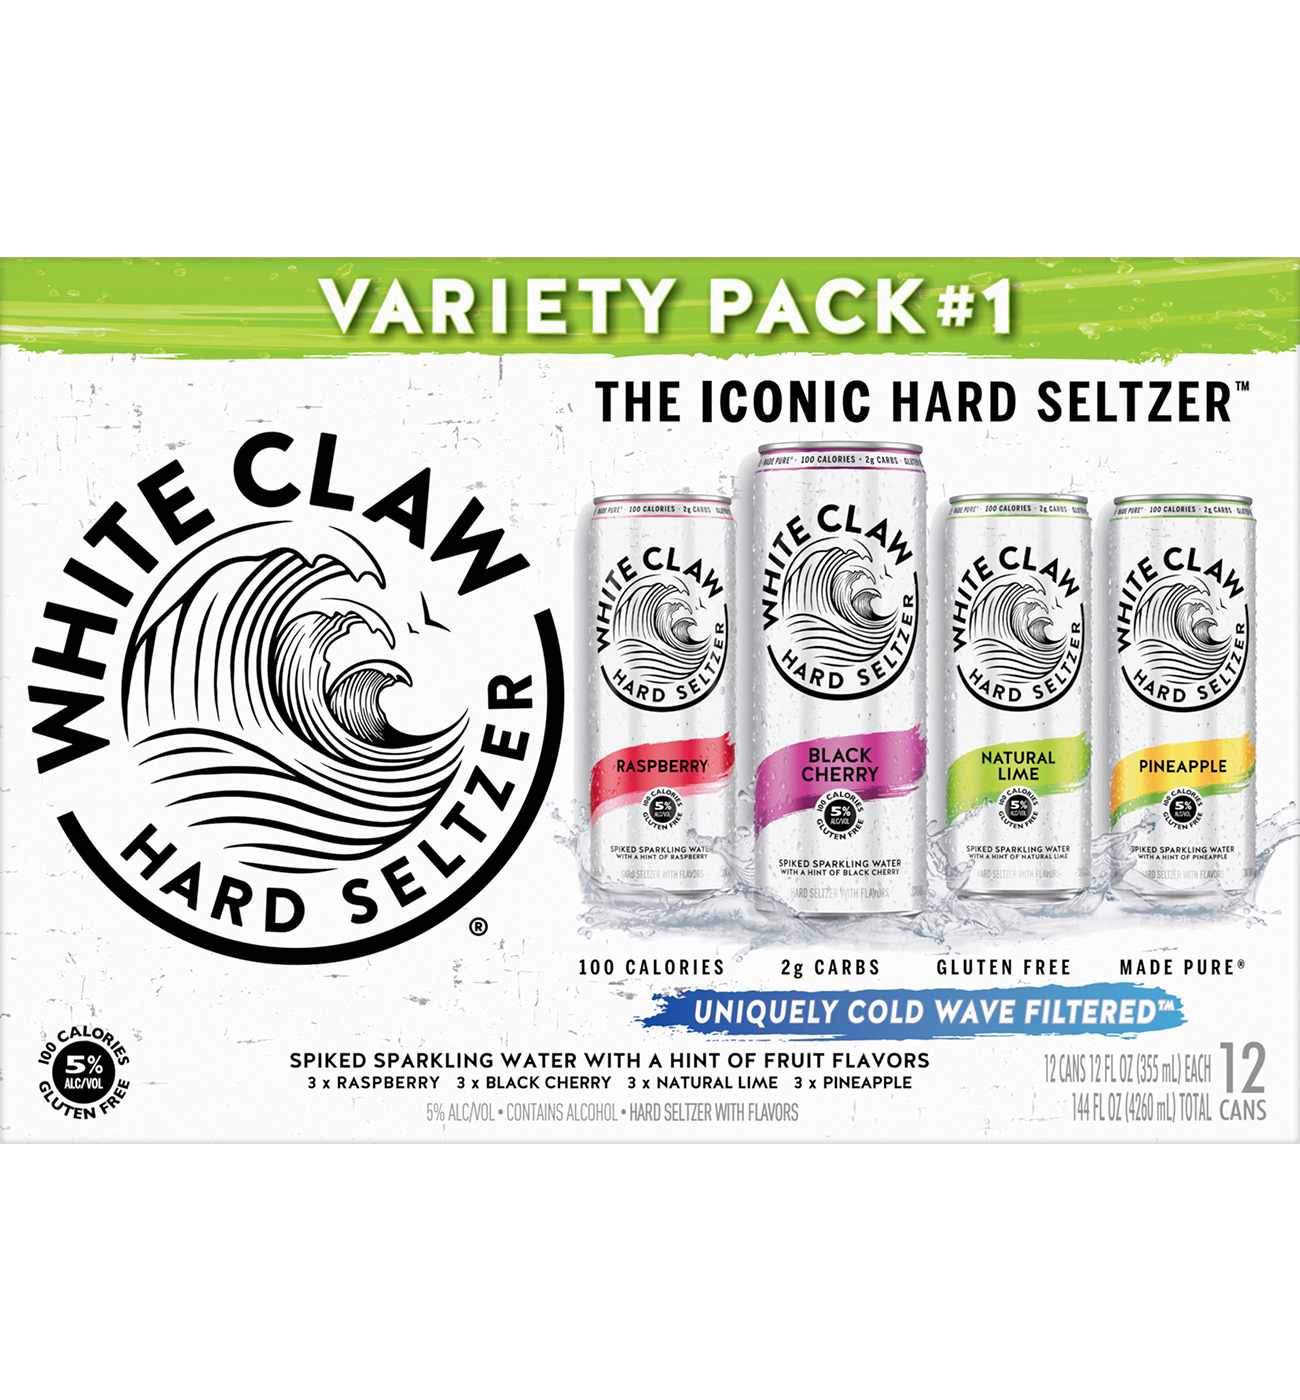 White Claw Hard Seltzer Variety Pack 12 pk Cans; image 1 of 4